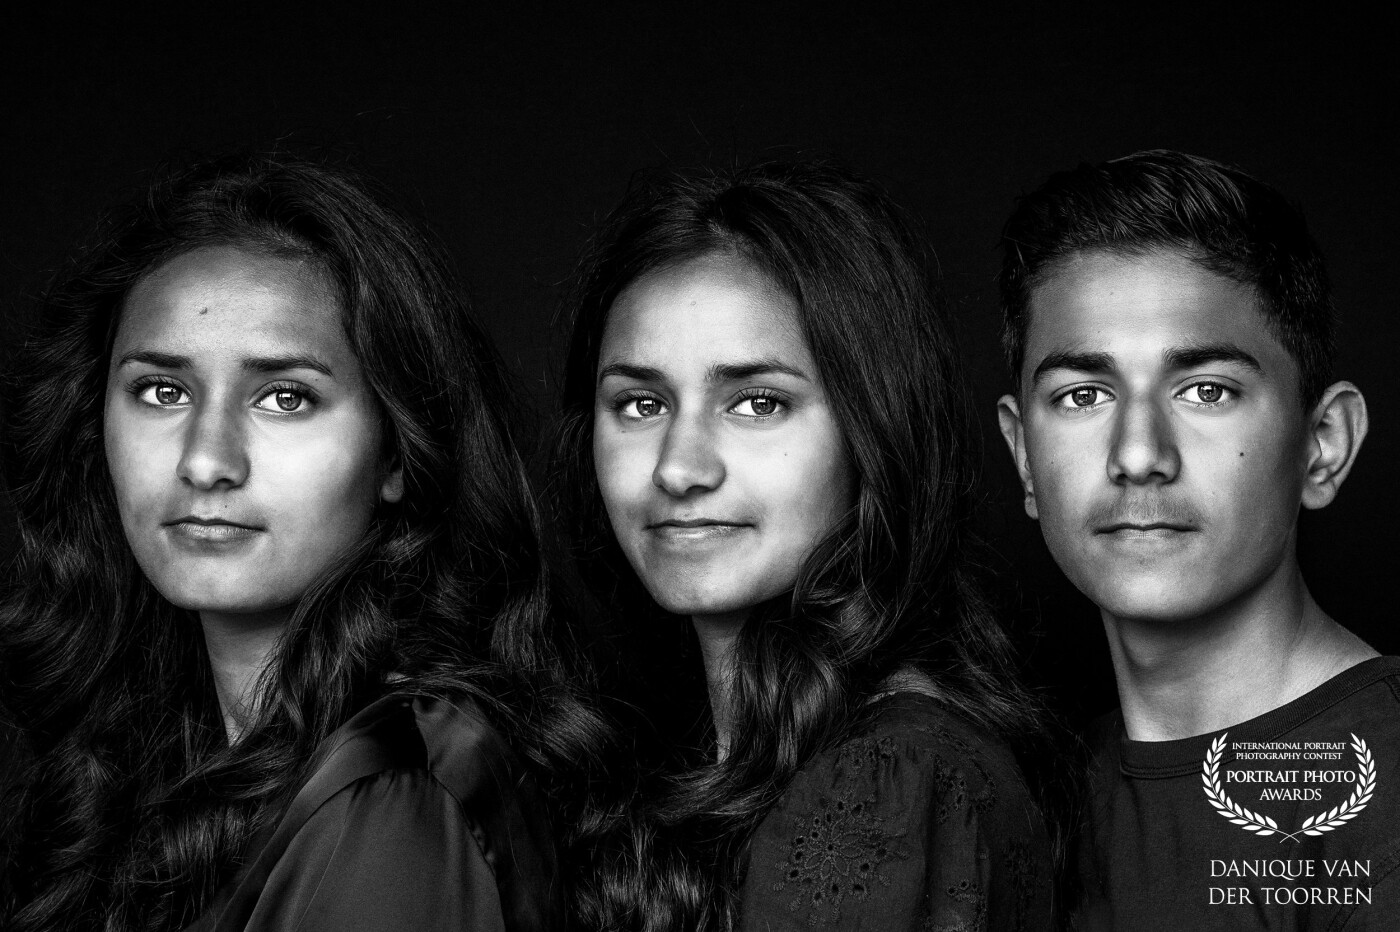 The real love between brother and 2 sisters.<br />
A nice black and white combination<br />
<br />
Model: Jada, Cassy & Kayne<br />
Photo & Lightroom edit: @daniquevdtphotography